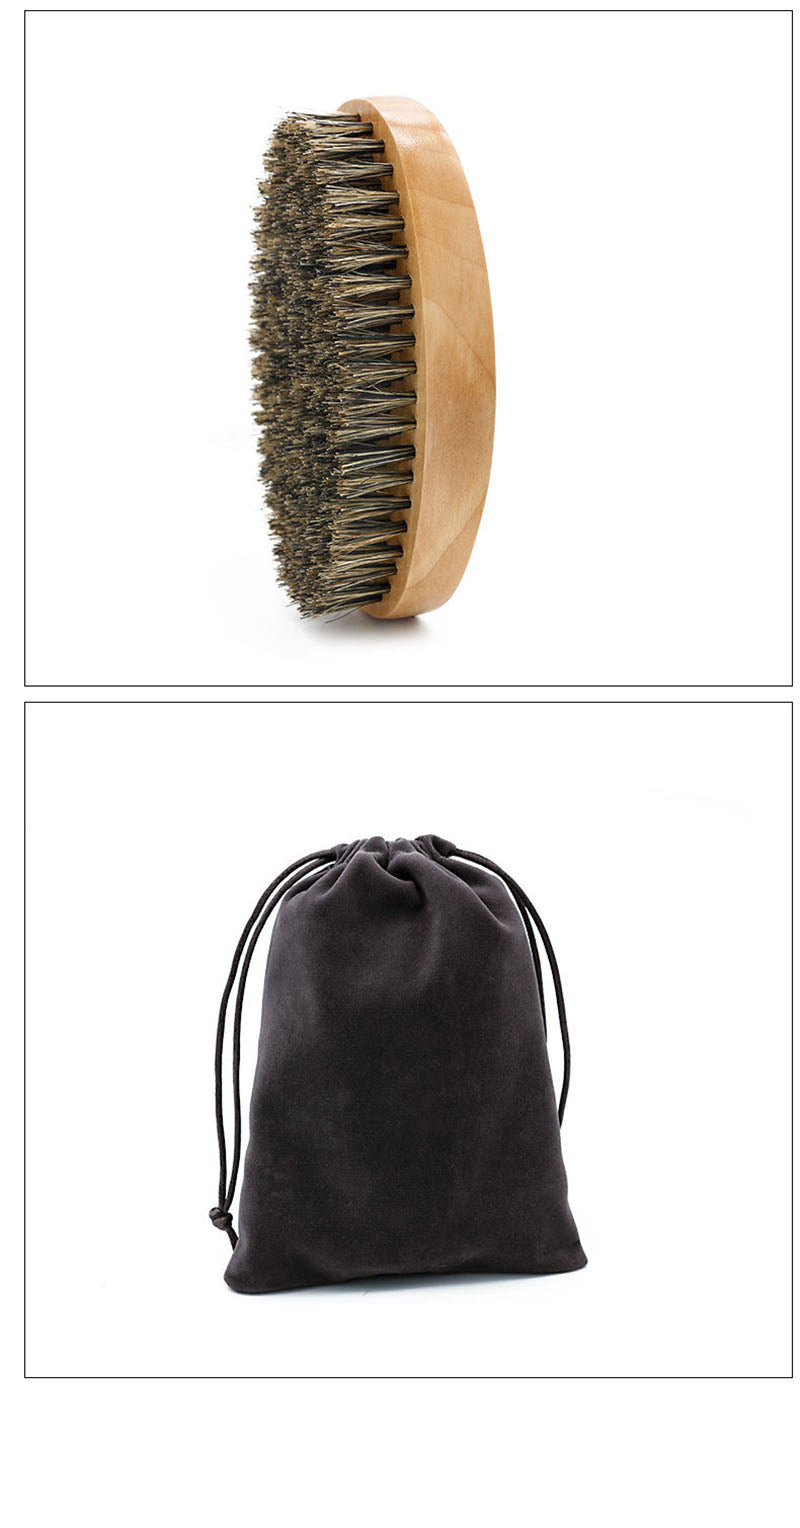 Grate Comb Pig Bristles Oval Brush Styling Comb